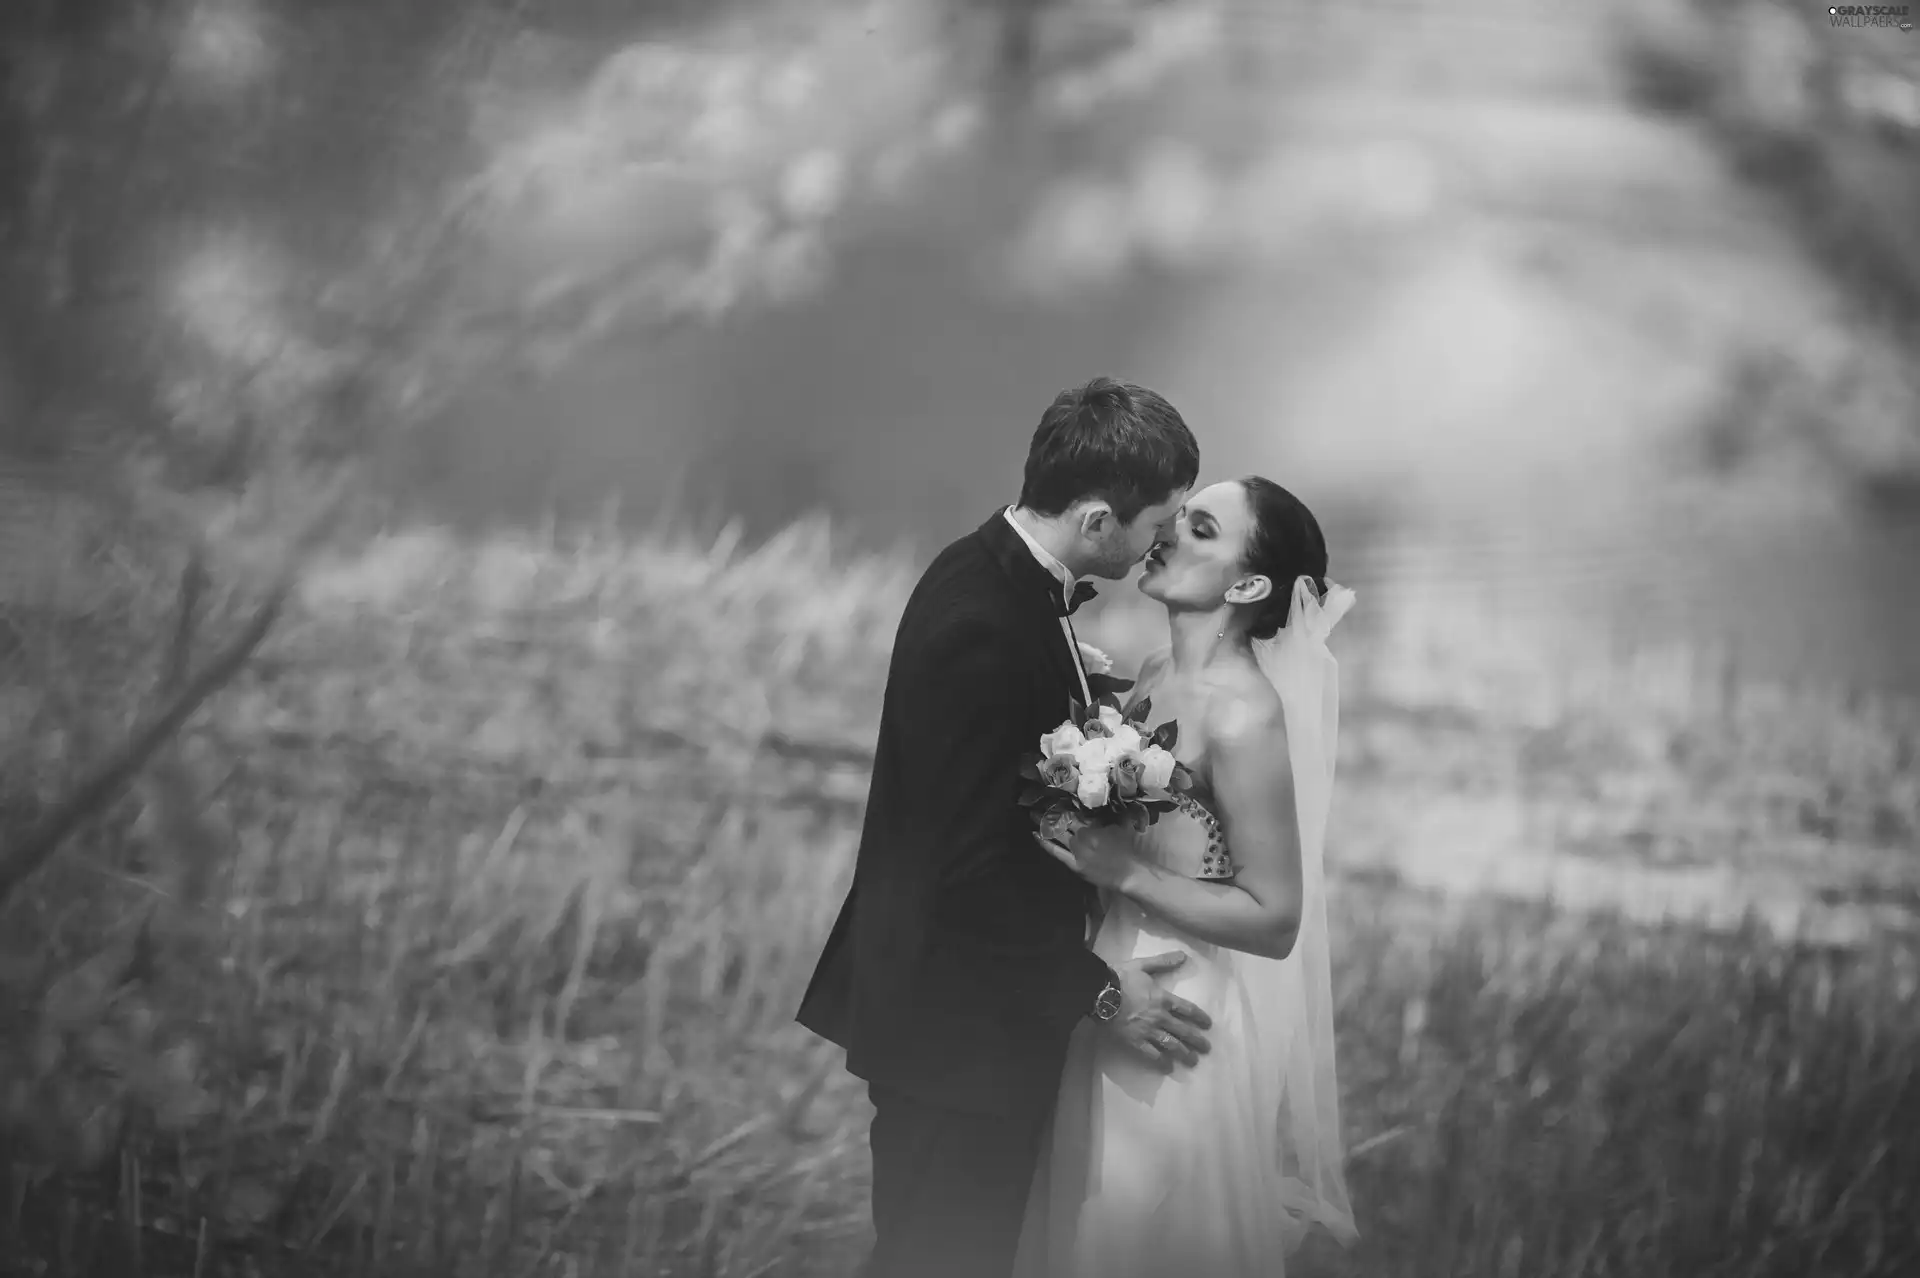 bunch, young, kiss, marriage, Steam, Flowers, blur